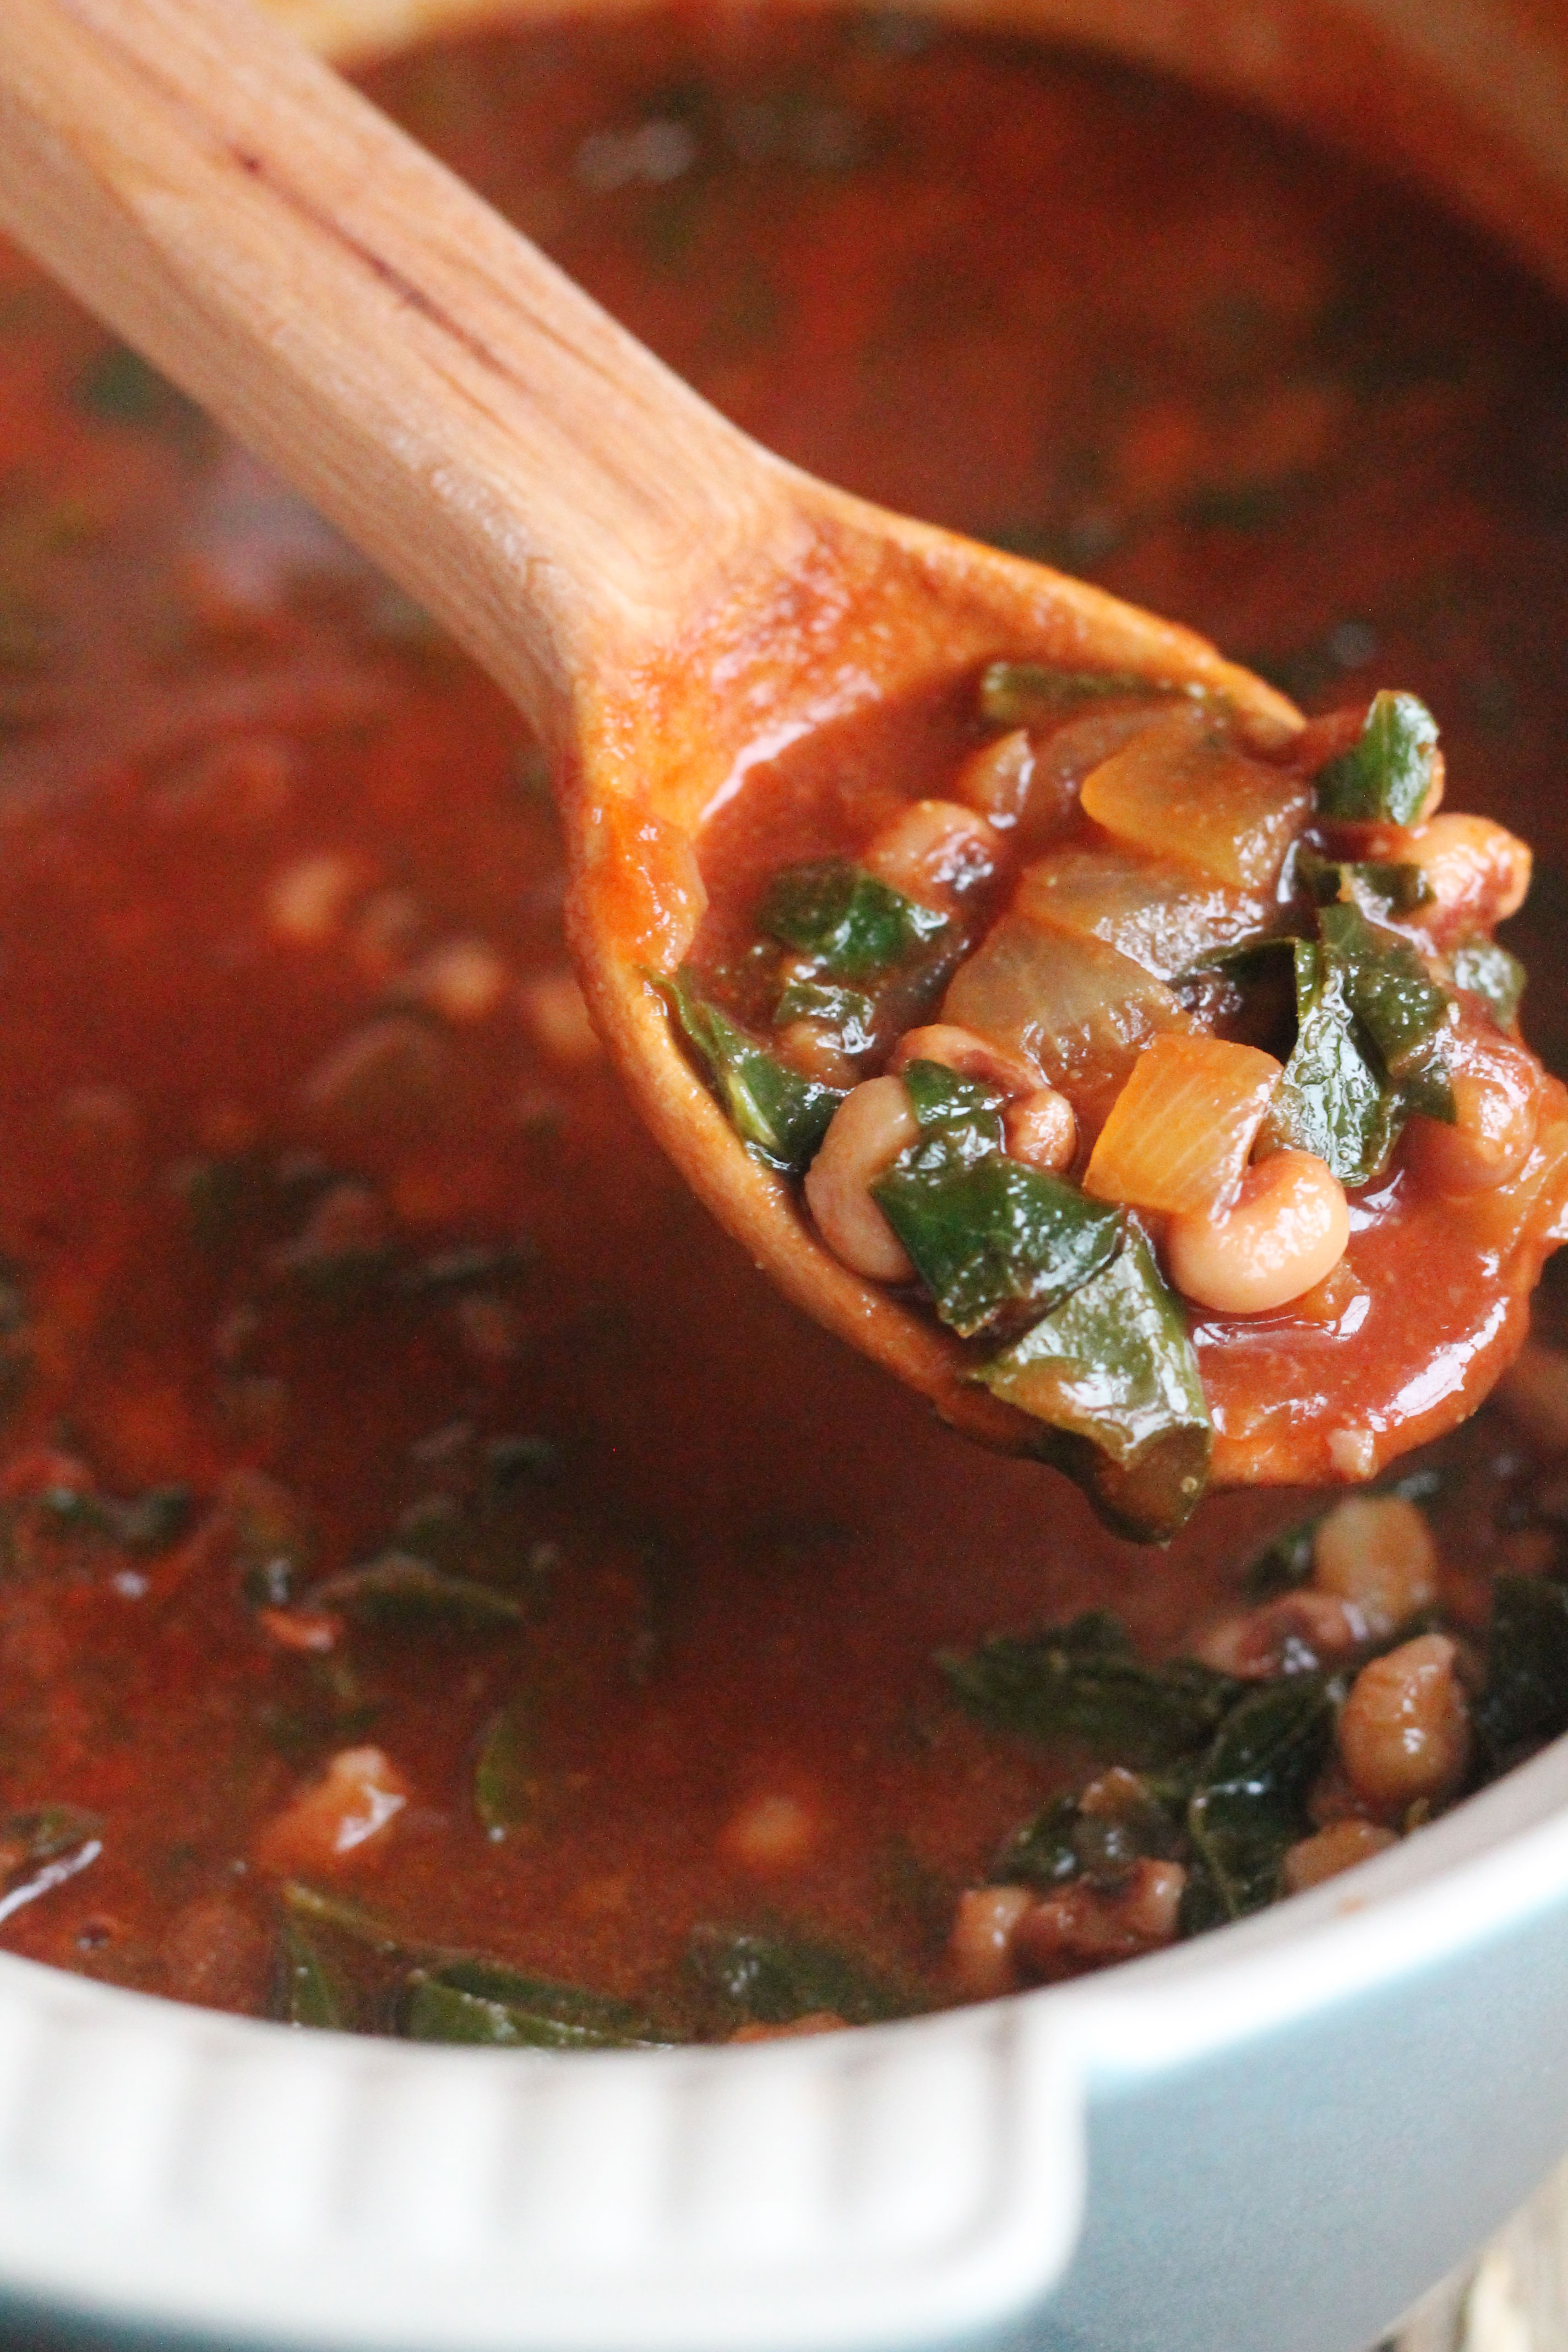 Black Eyed Pea and Collard Green Soup - A quick and easy meal for those busy week-nights